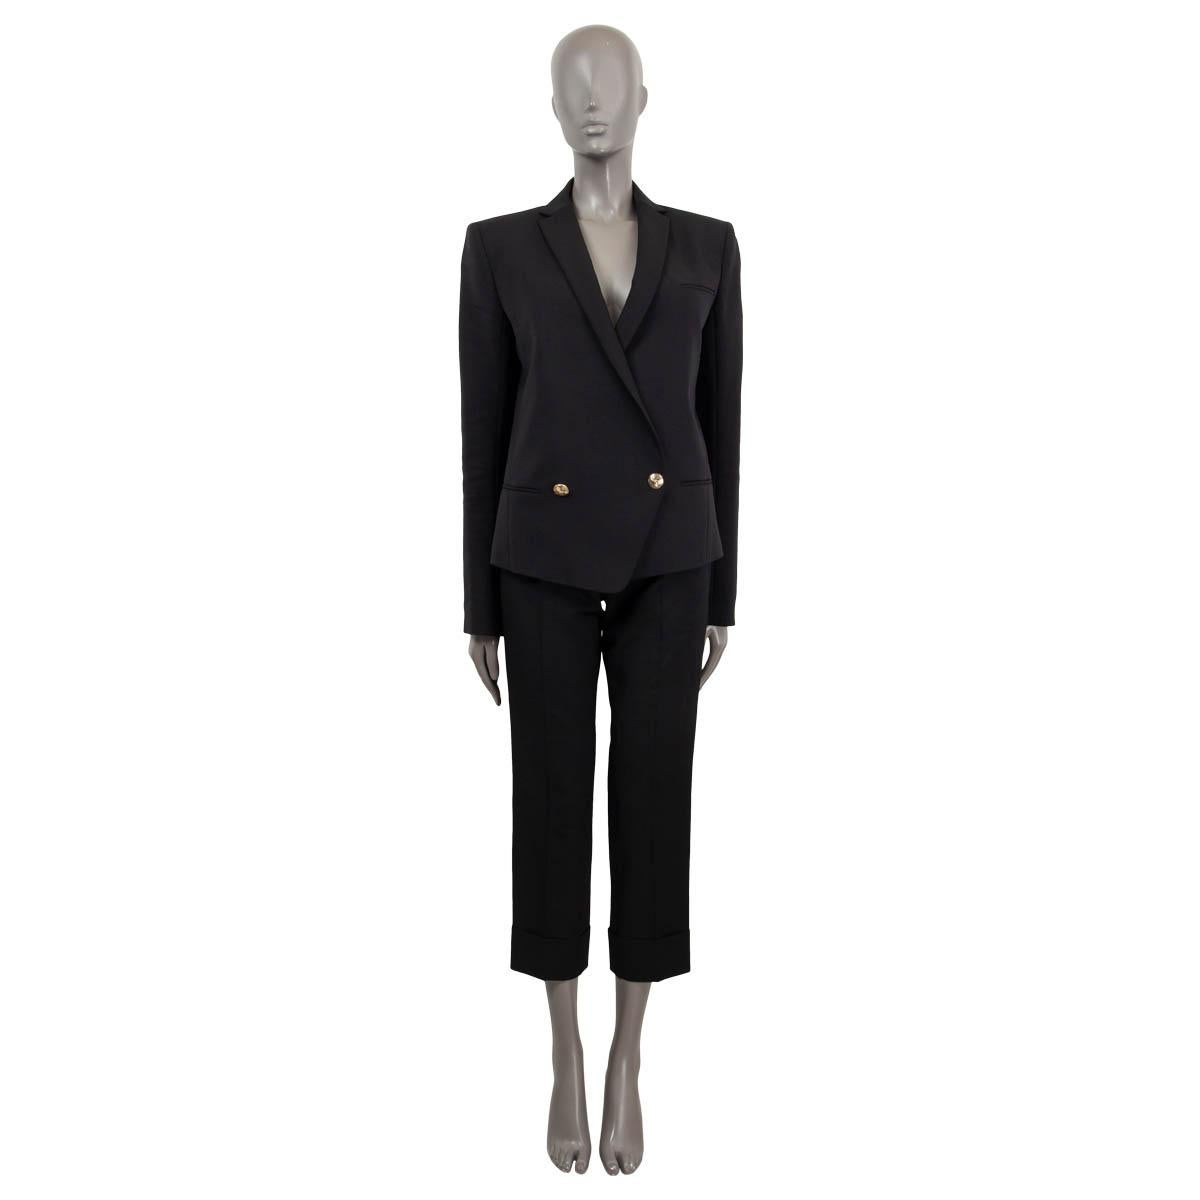 100% authentic Balmain two button blazer in black wool (95%) and elastane (5%). Features slip pocket on the chest, two slip pockets and buttoned cuffs. Closes with embossed logo gold-tone buttons an the front. Lined in black viscose (52%) and cupro